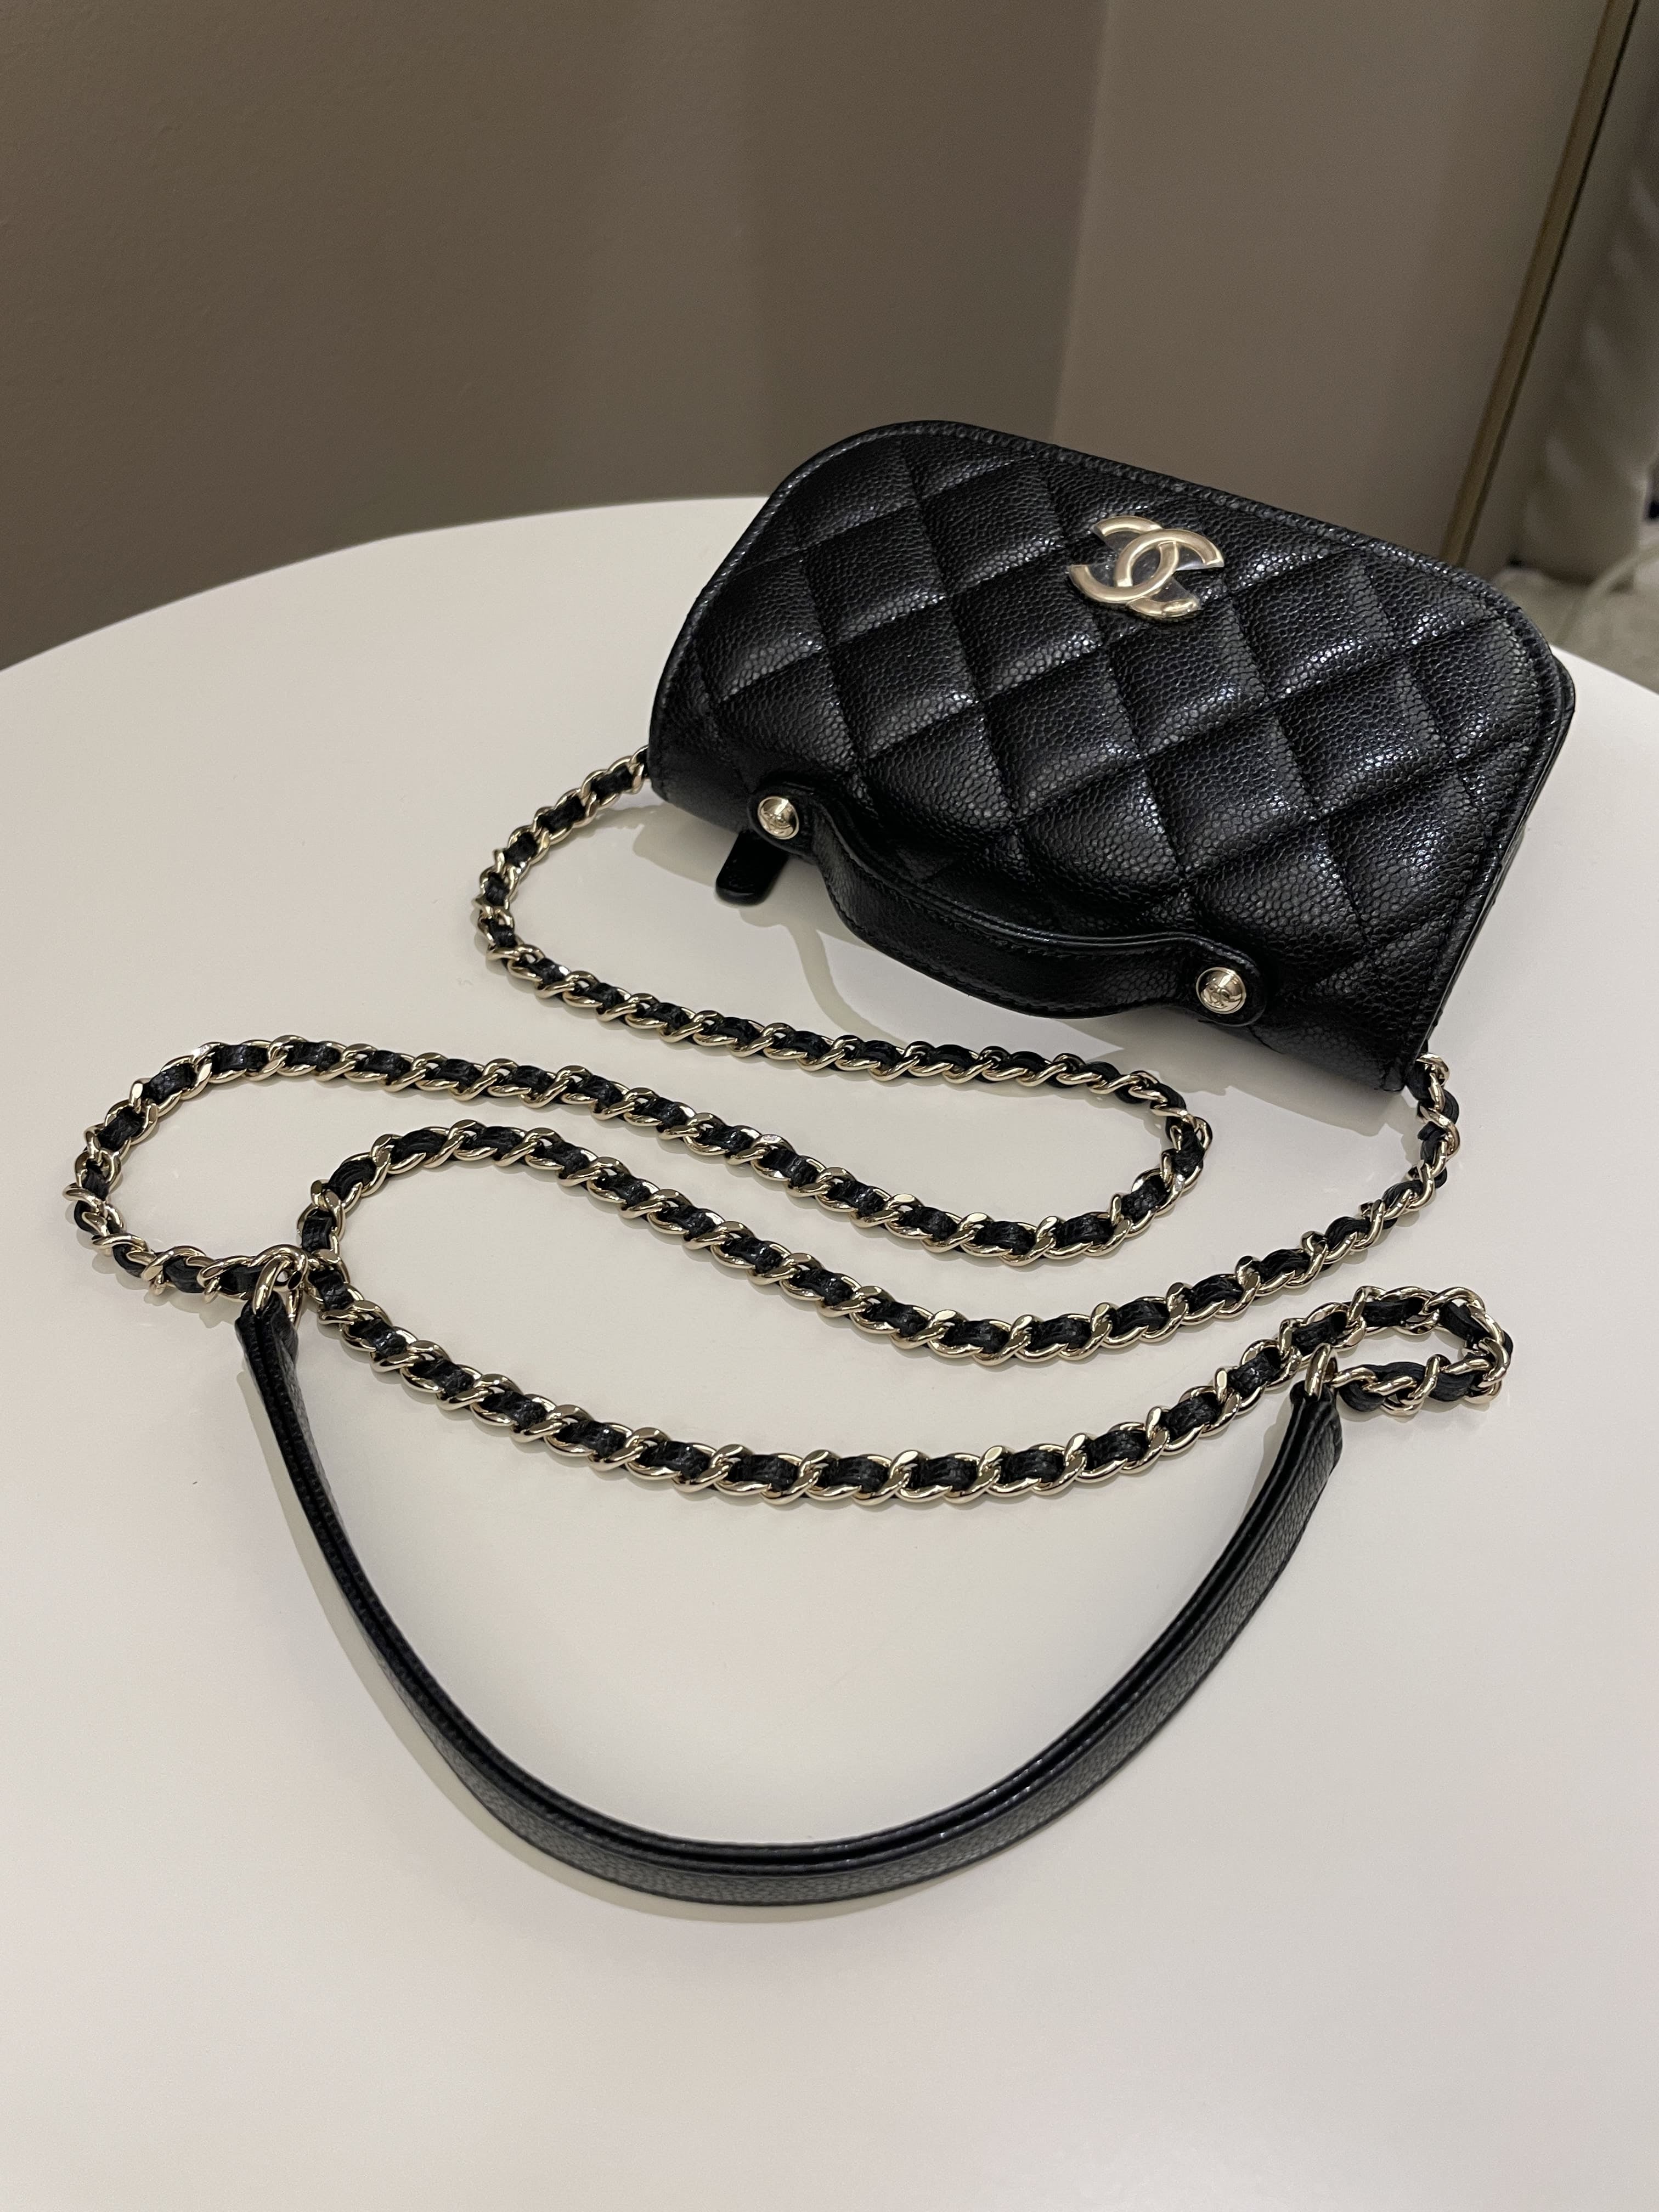 chanel business affinity clutch